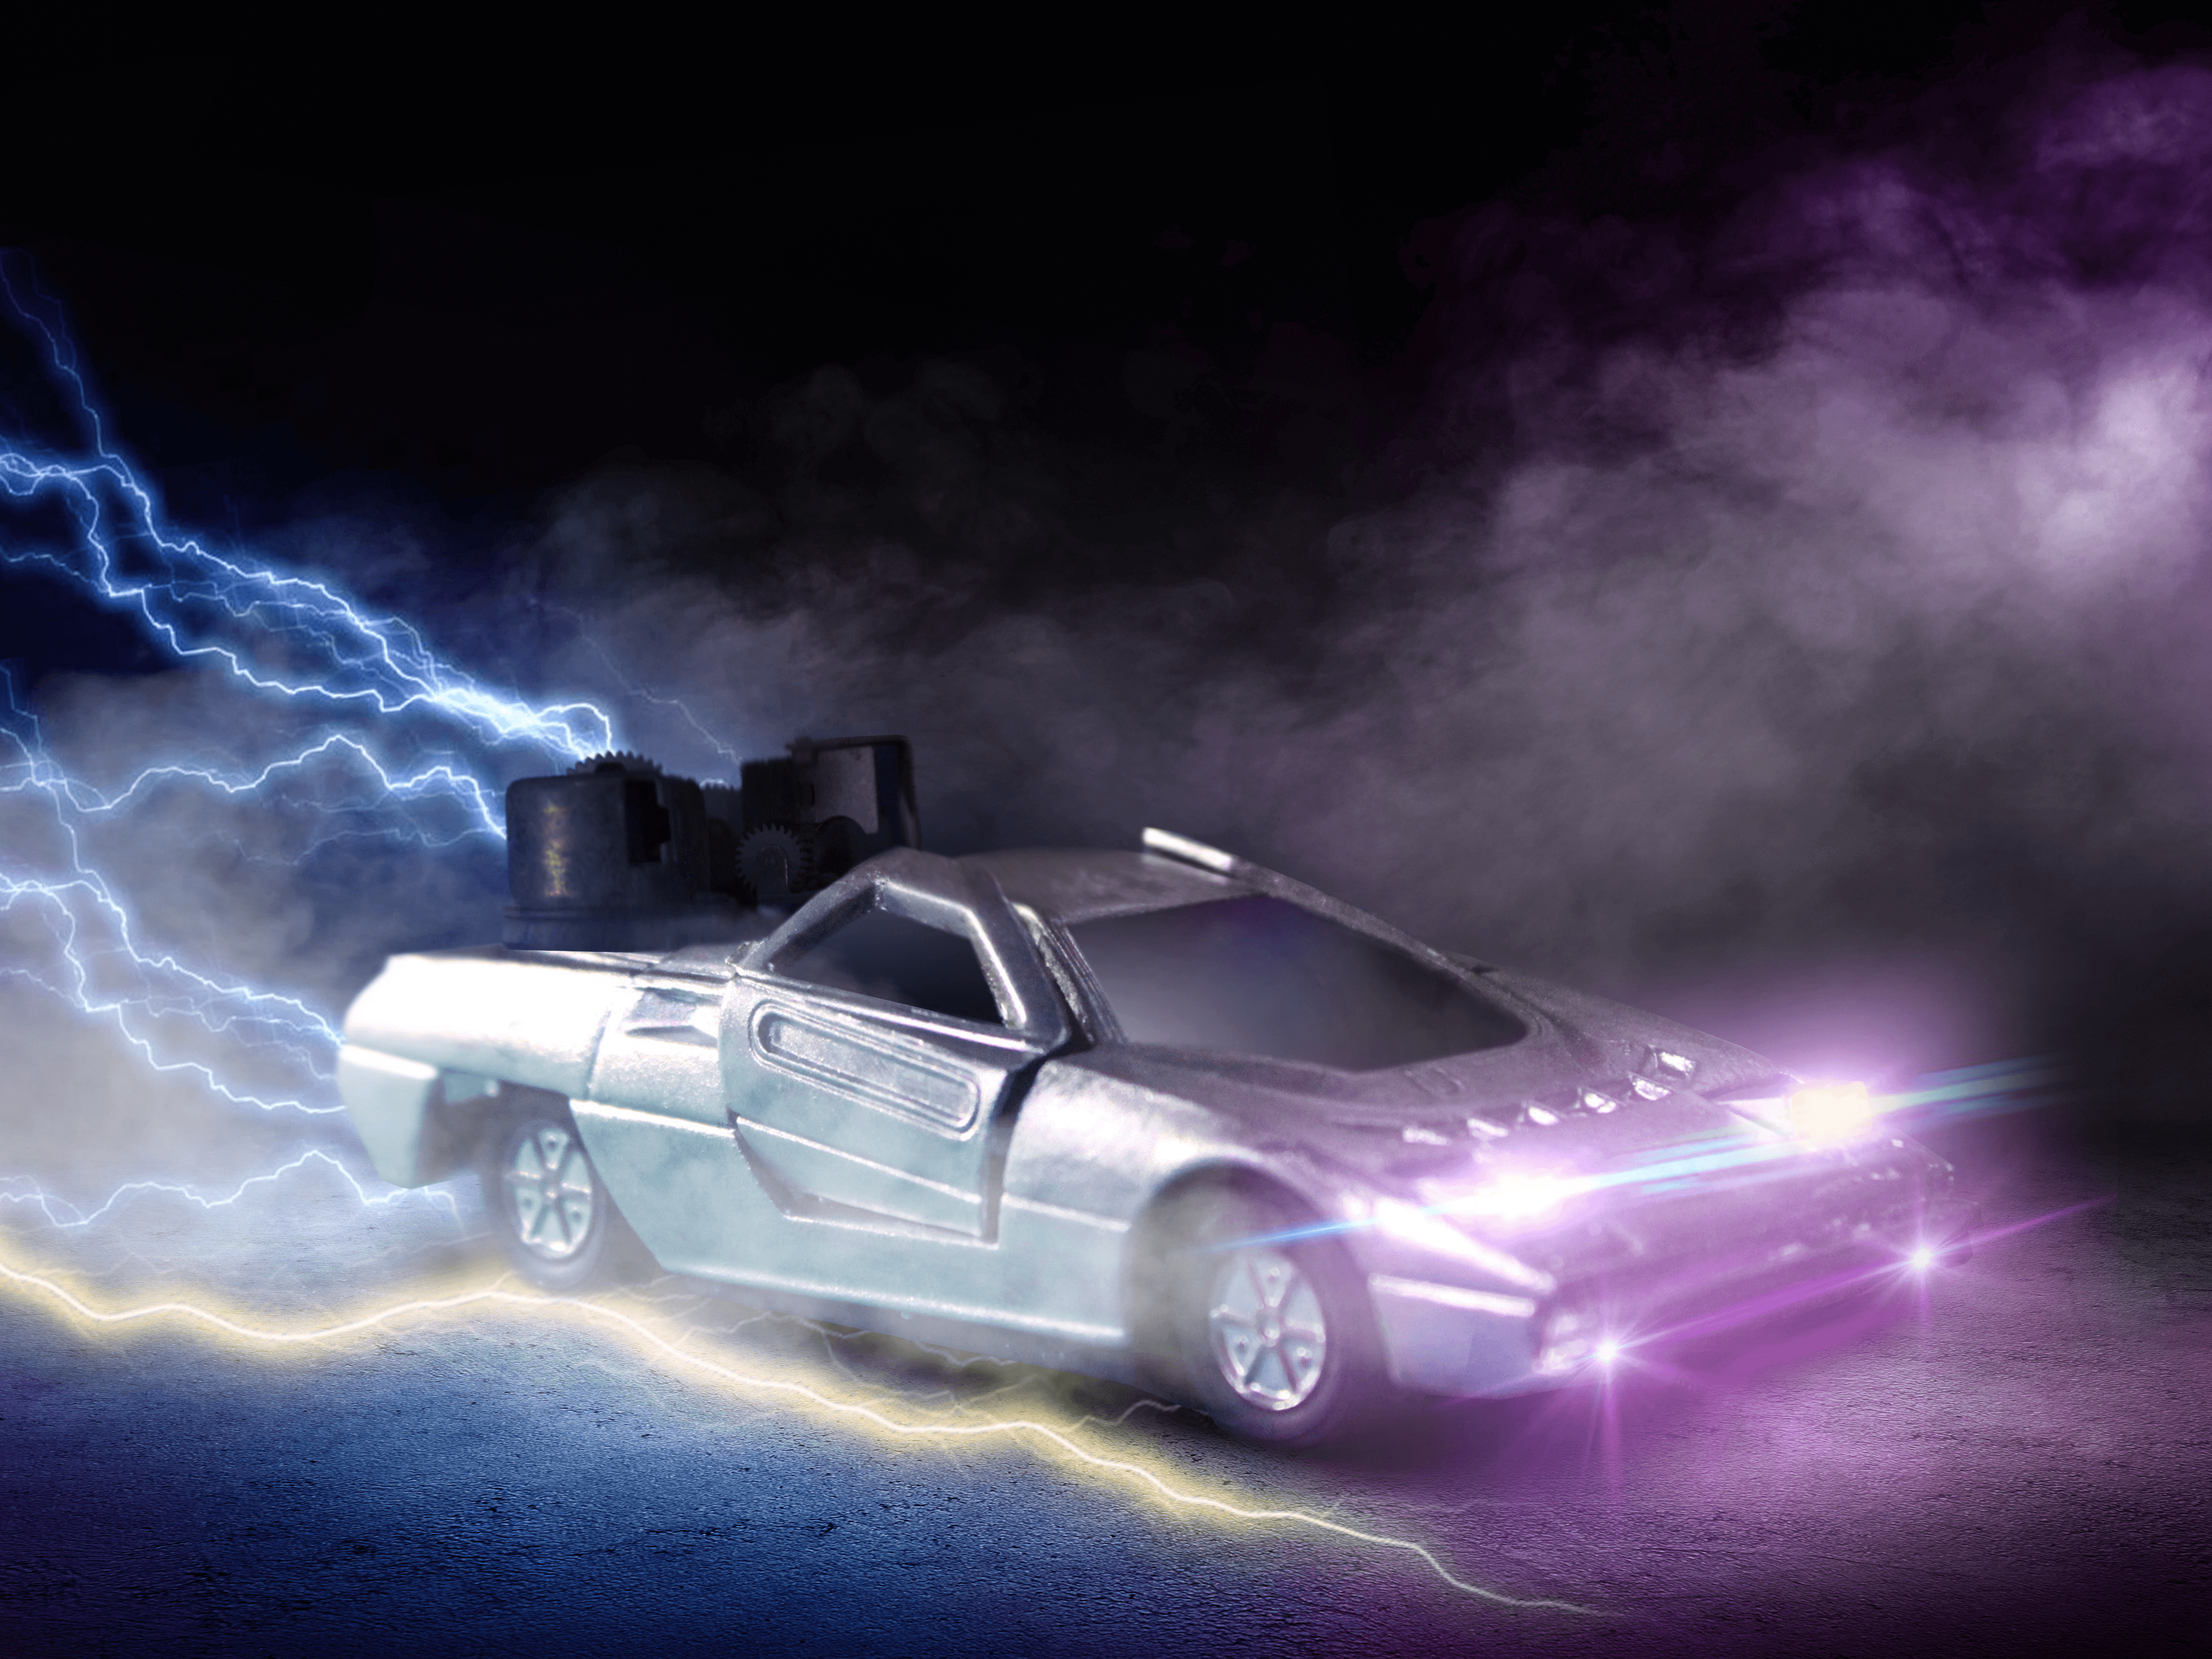 Scale model photography ( back to the future )